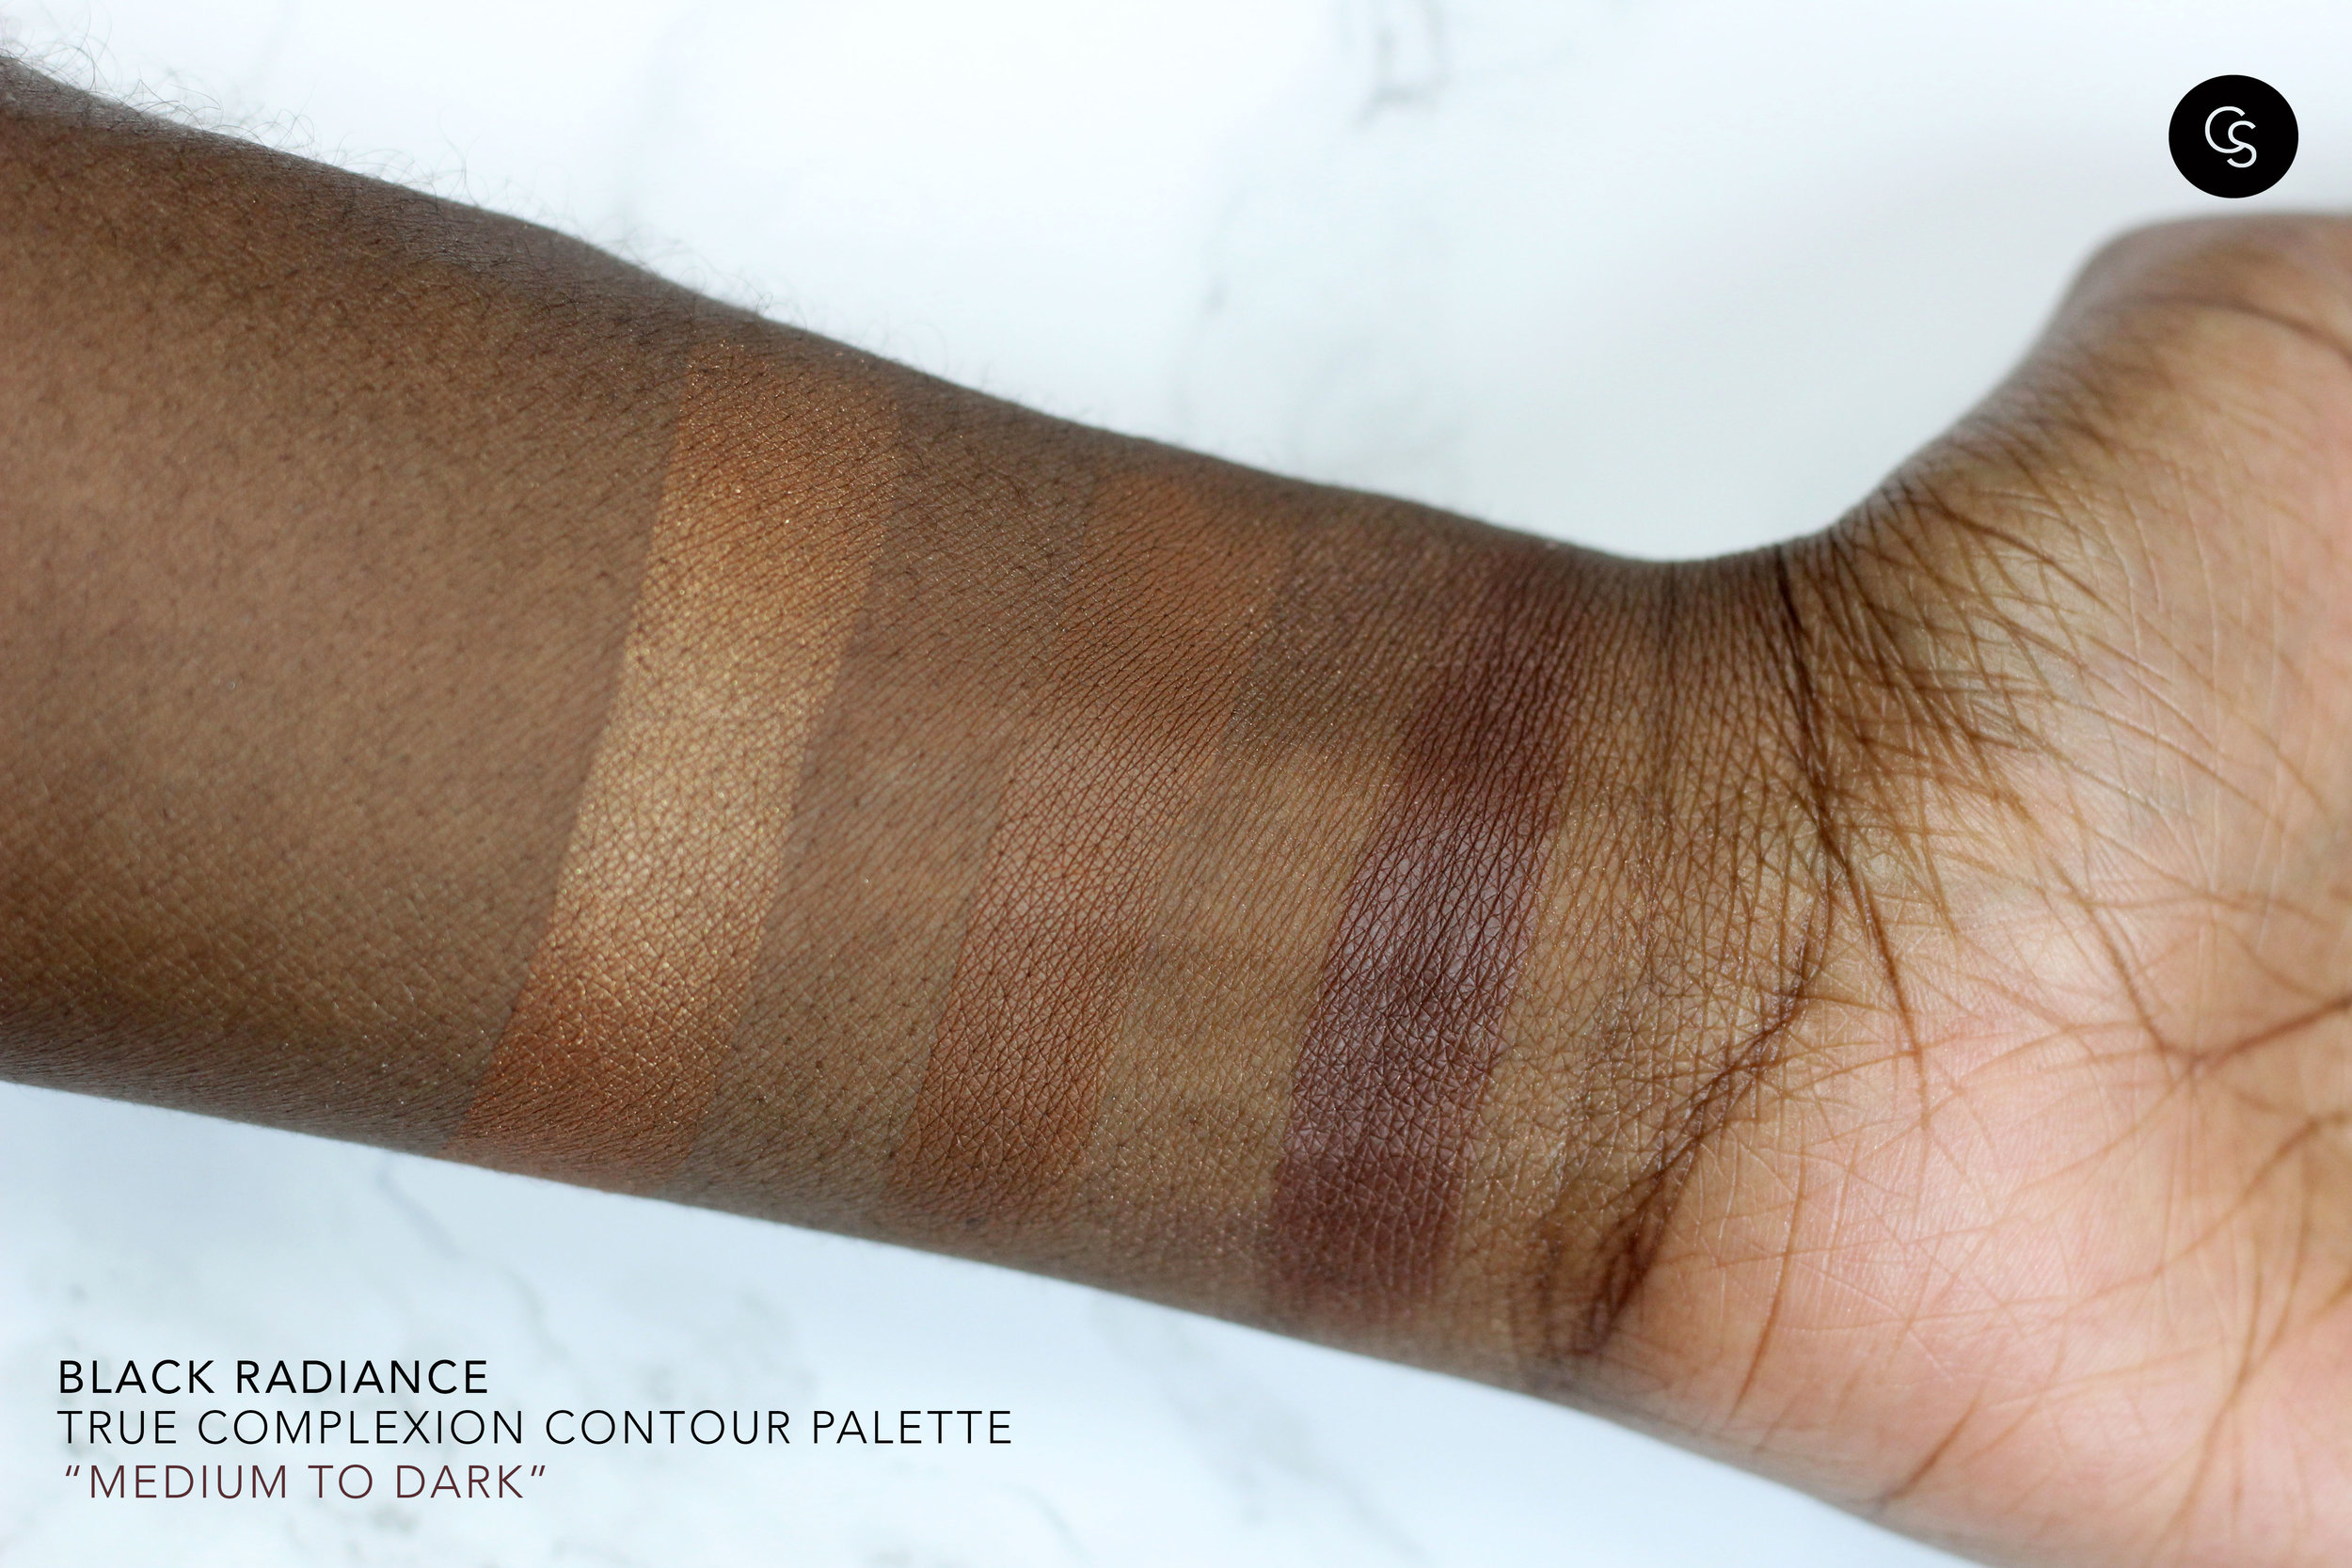 Radiance True Complexion Contour Kit in Medium Dark | Cocoa Swatches Cocoa Swatches